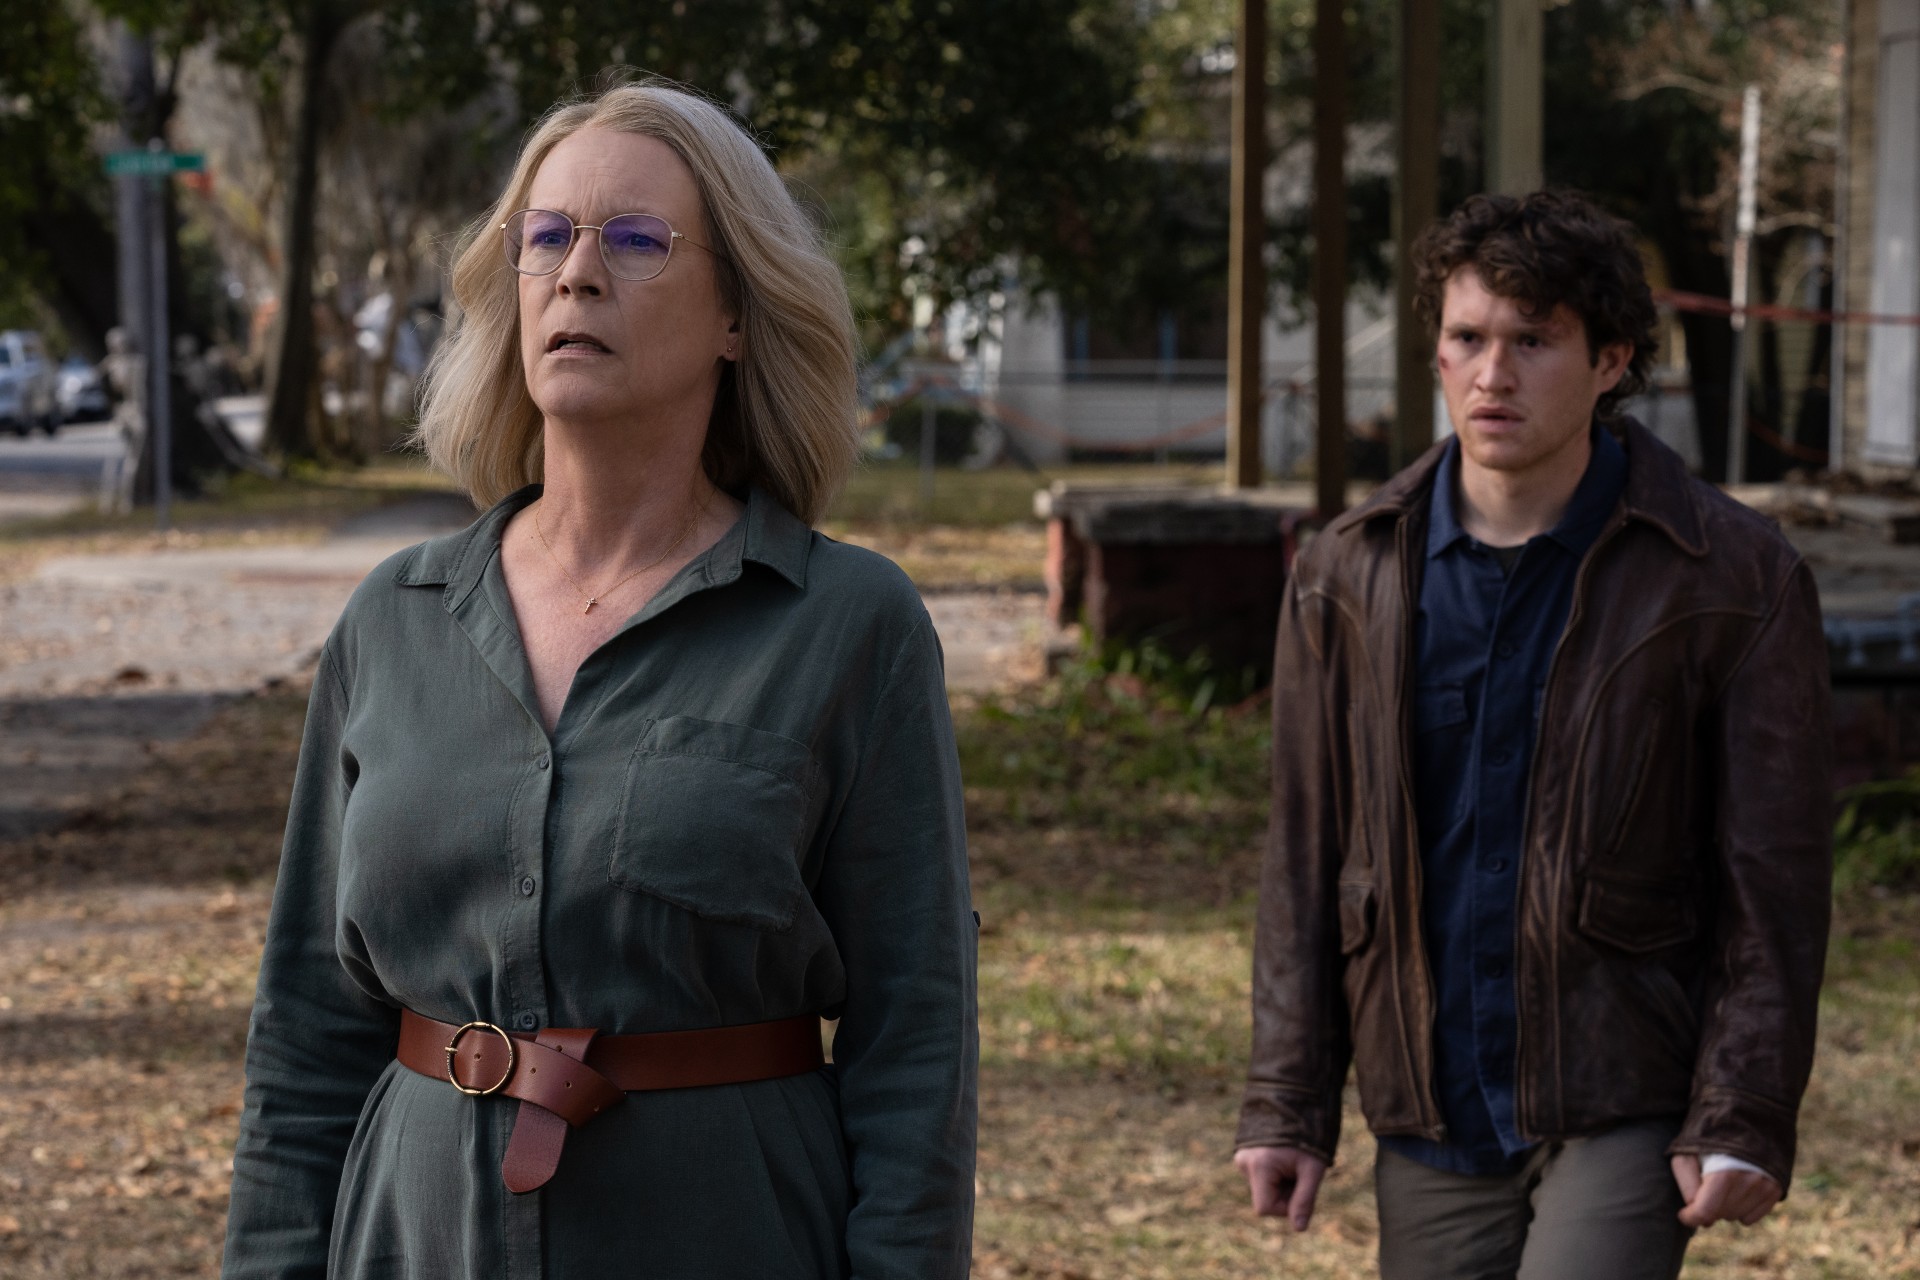 Sorry, haters: Halloween Ends is actually a good movie